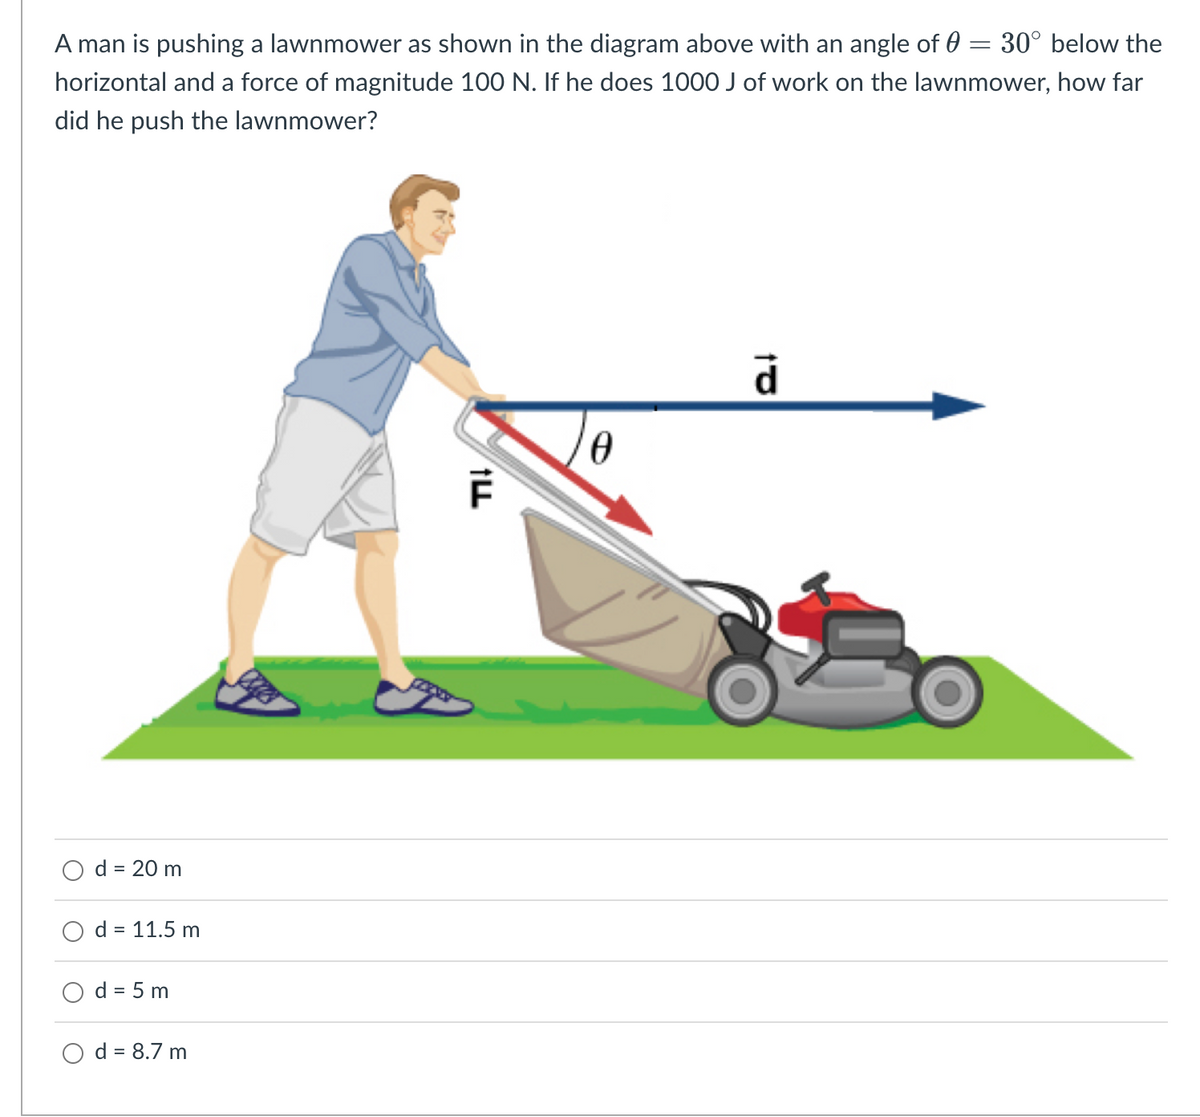 A man is pushing a lawnmower as shown in the diagram above with an angle of 0 = 30° below the
horizontal and a force of magnitude 100 N. If he does 1000 J of work on the lawnmower, how far
did he push the lawnmower?
d = 20 m
d = 11.5 m
d = 5 m
d = 8.7 m
ILL
0
to
d